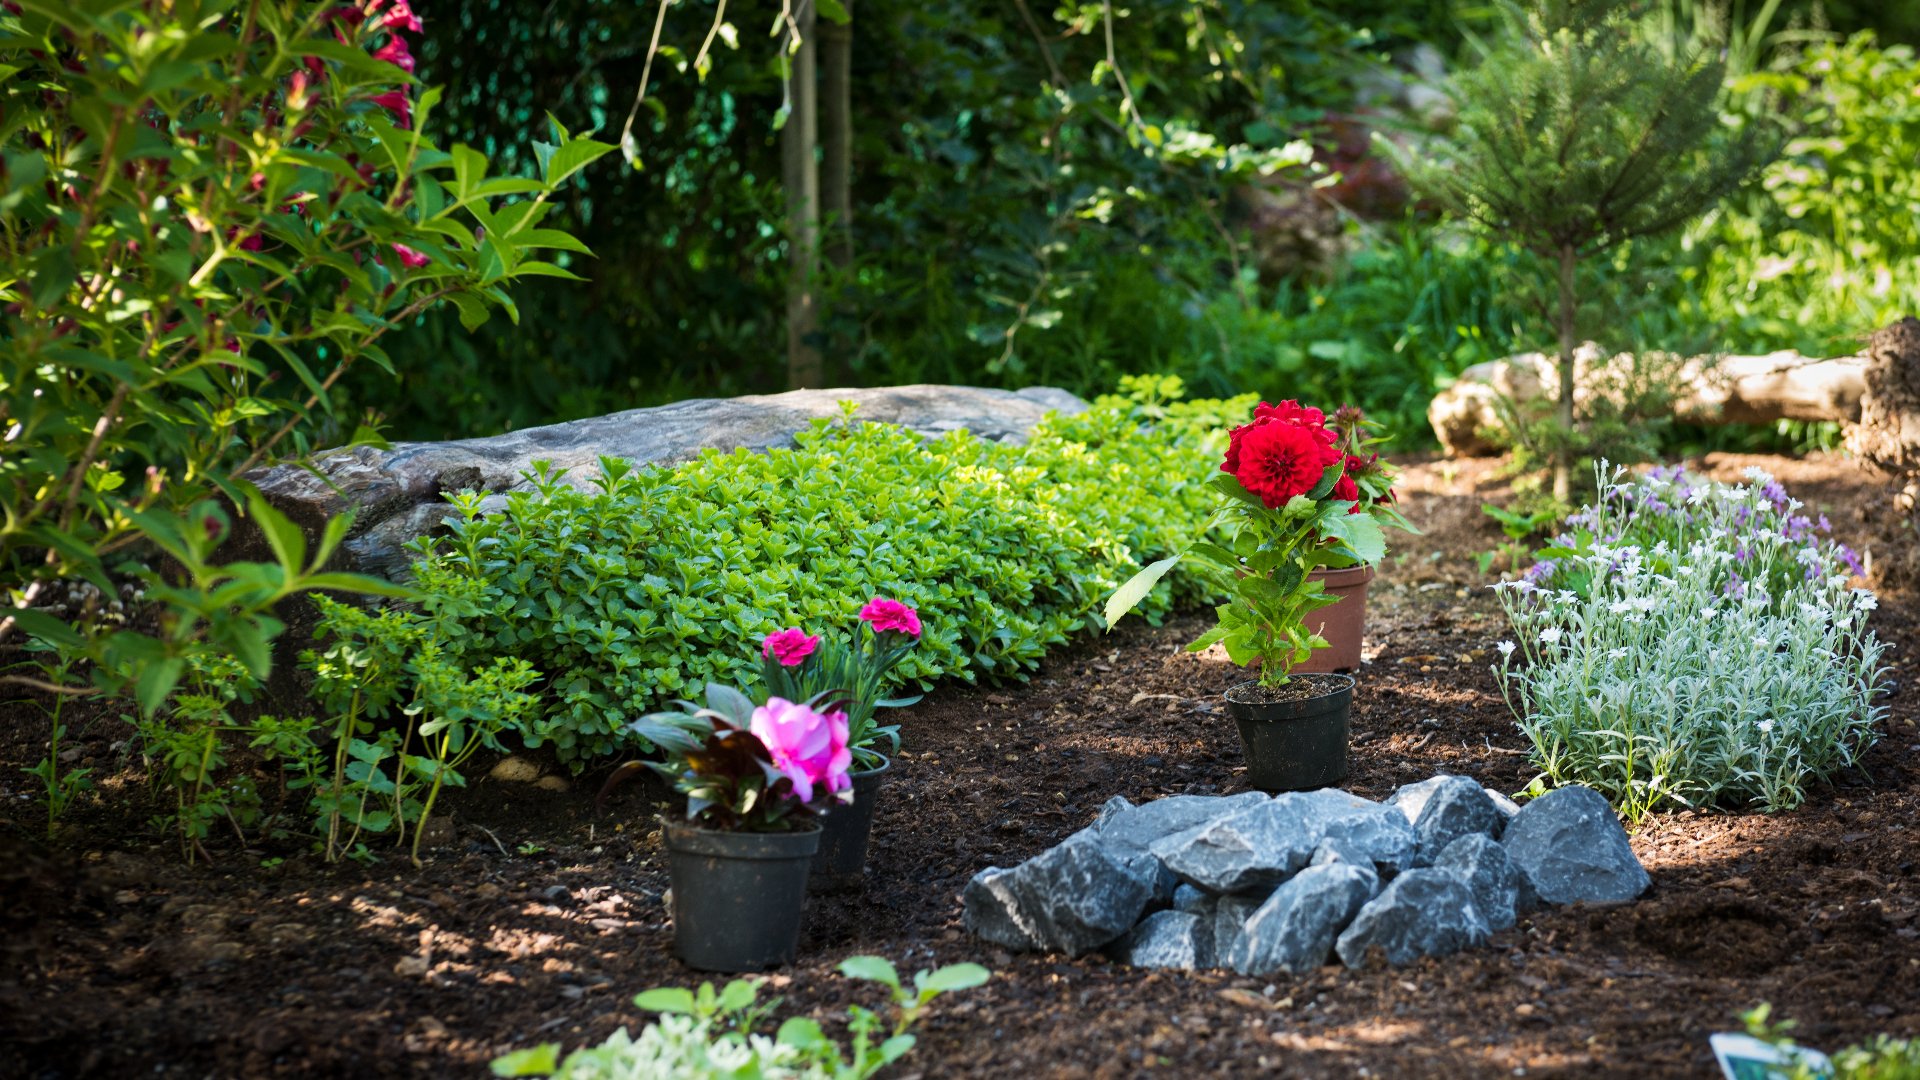 Don't Forget About Your Landscape Beds - They Need TLC Too!